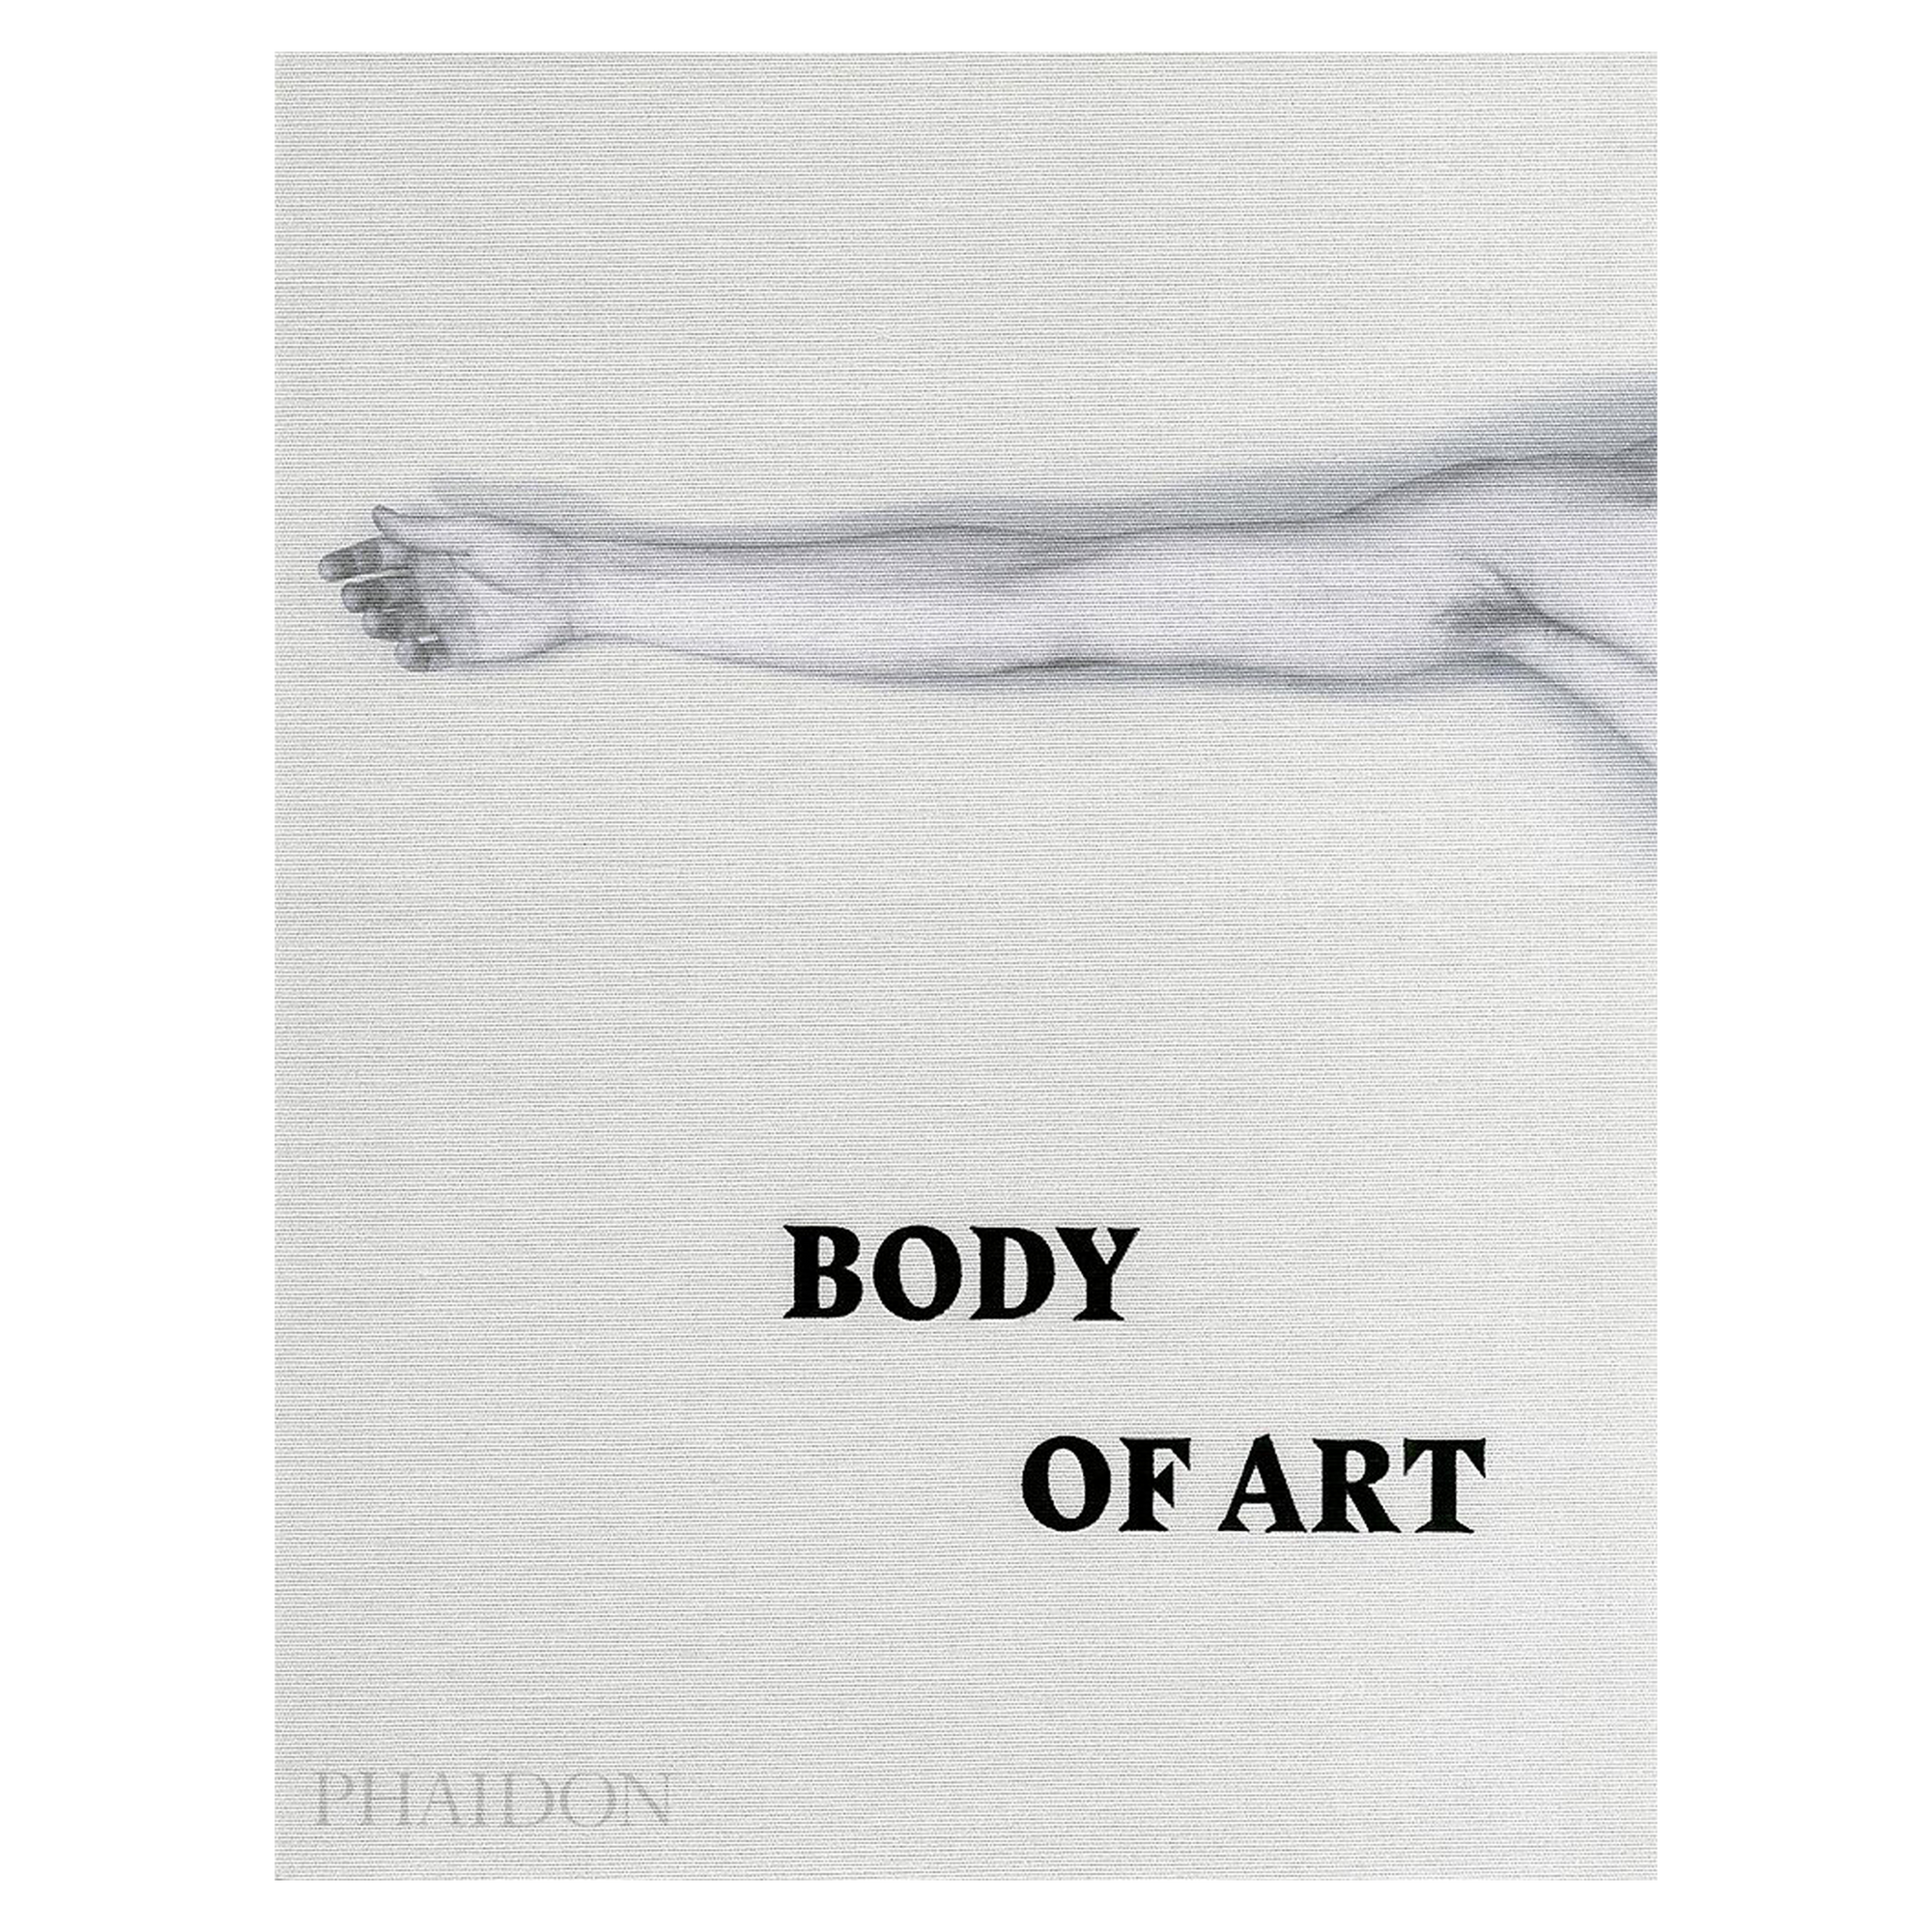 The first book to celebrate the beautiful and provocative ways artists have represented, scrutinized and utilized the body over centuries.